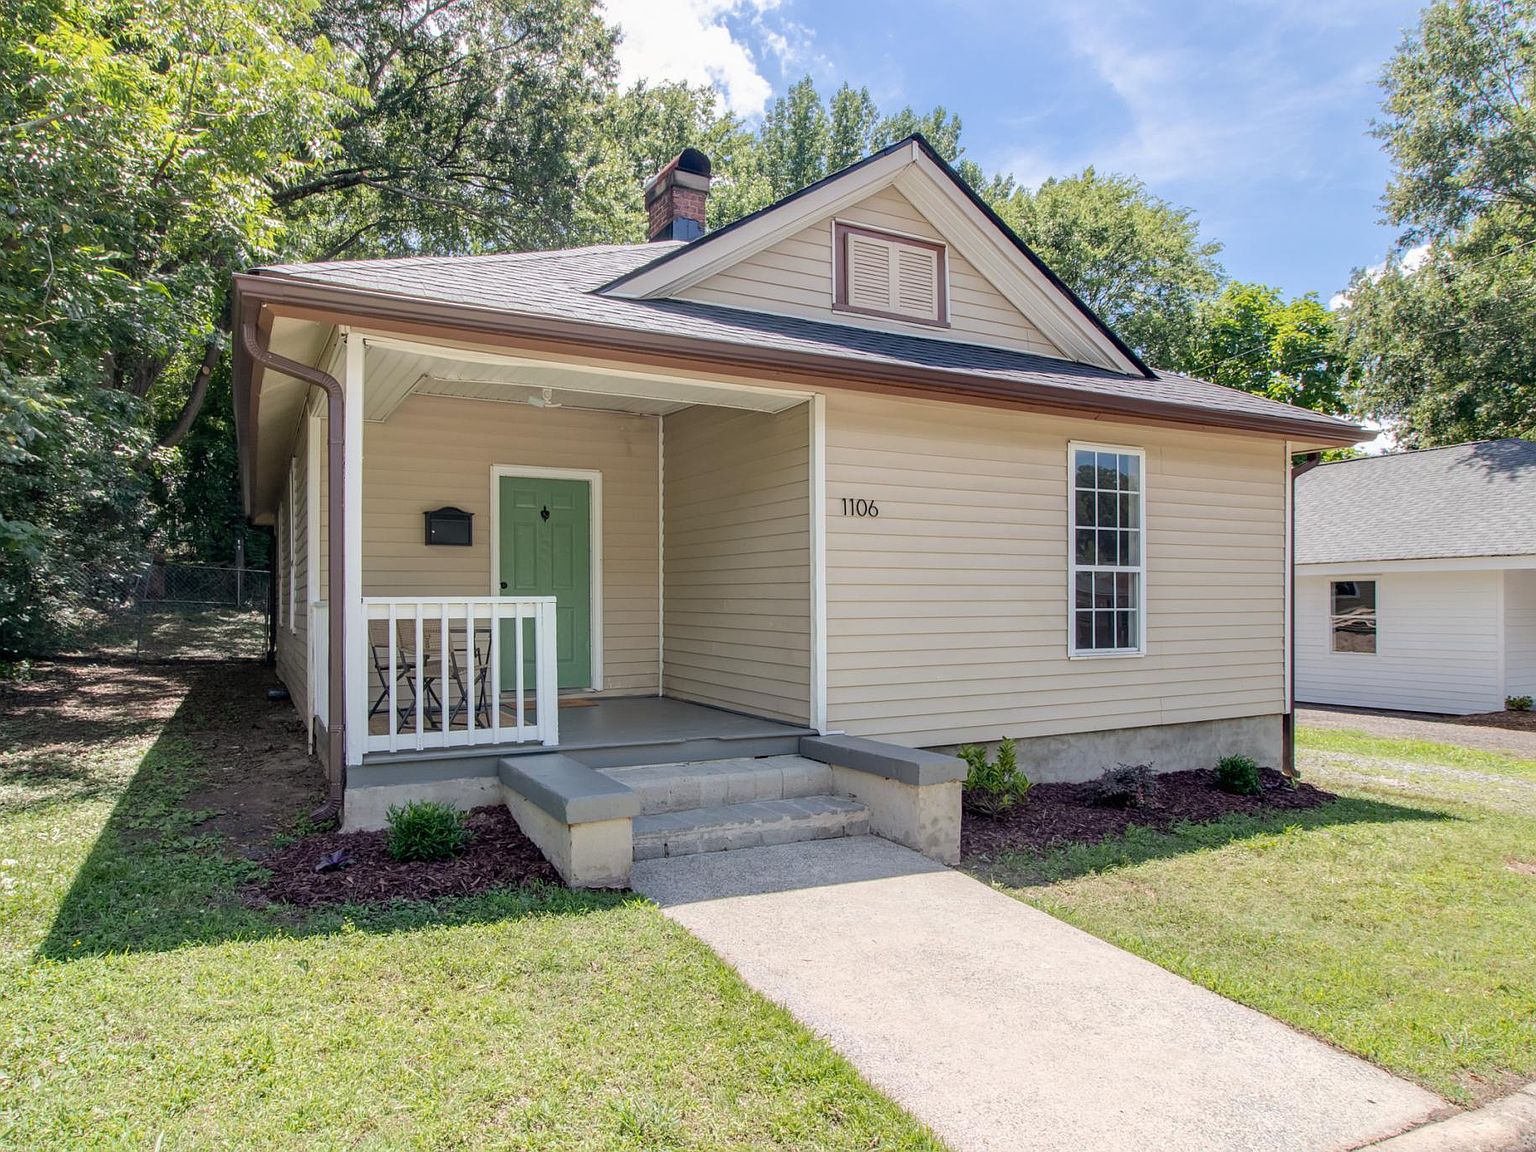 1106 Taylor St, Durham, NC 27701 | Zillow